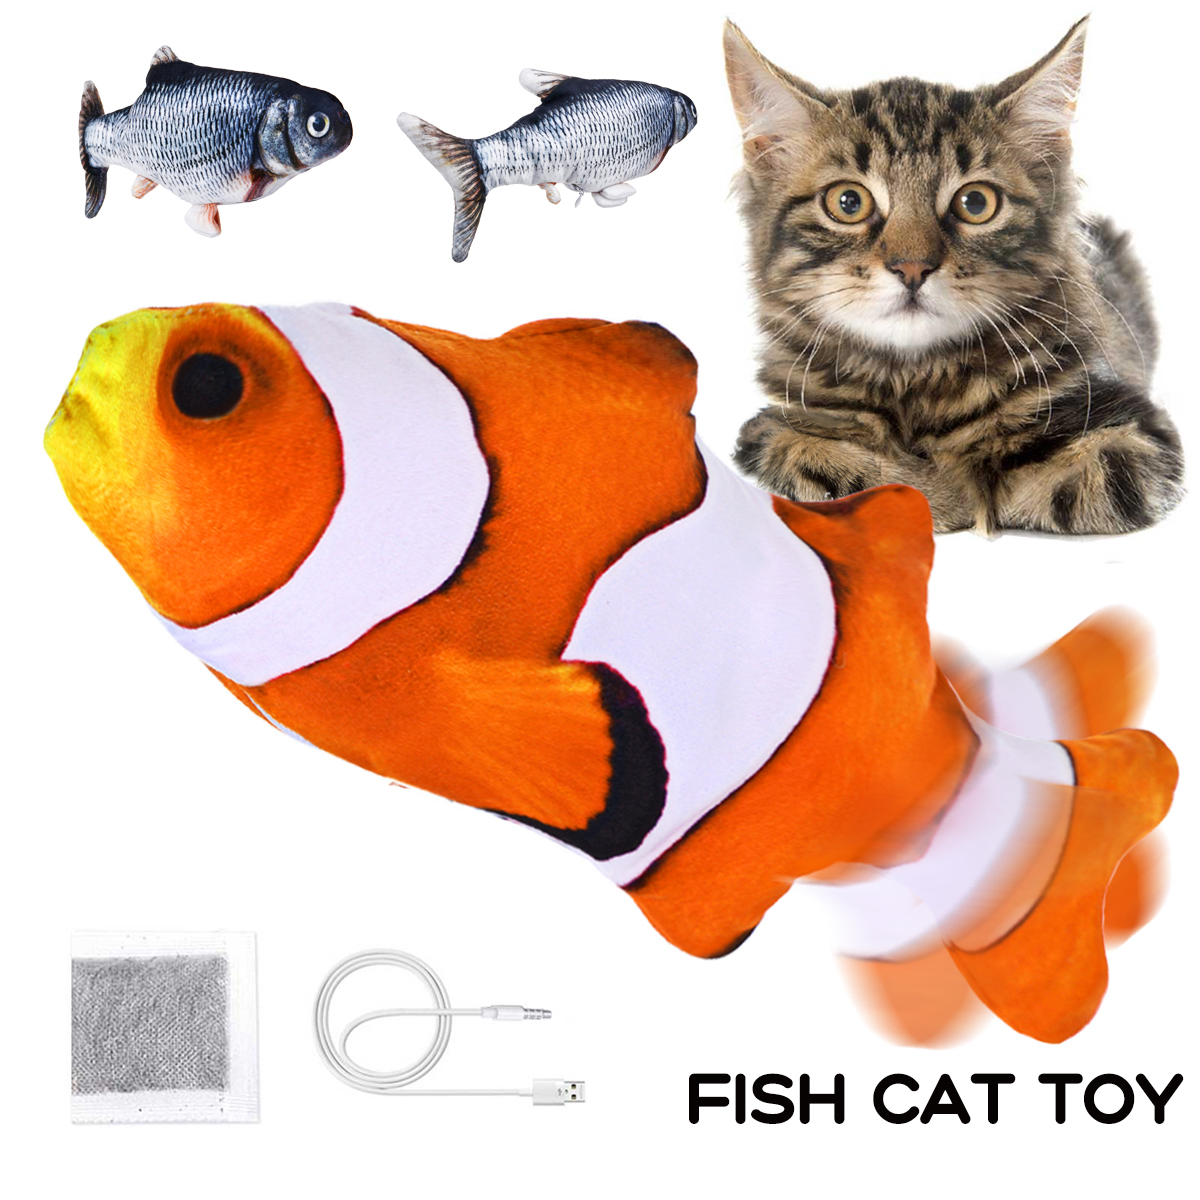 Jeteven-Cat-Clownfish-Carp-with-Catnip-Charging-Cable-Catnip-Puppy-Toy-Pet-Supplies-Dog-Playing-1898320-3